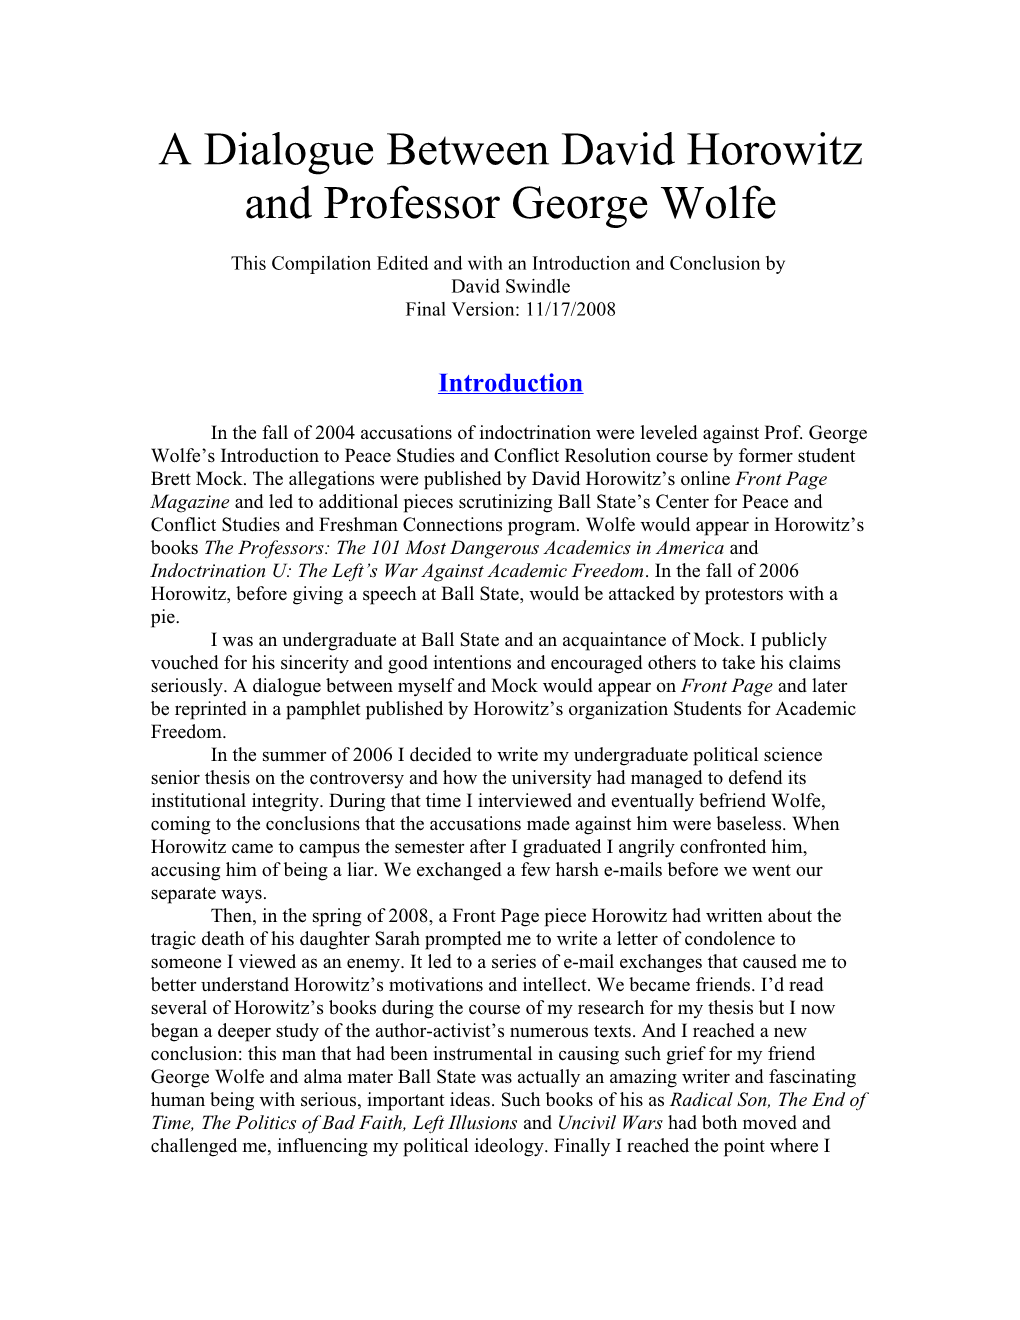 A Dialogue Between David Horowitz and George Wolfe on the Academic Freedom Controversy